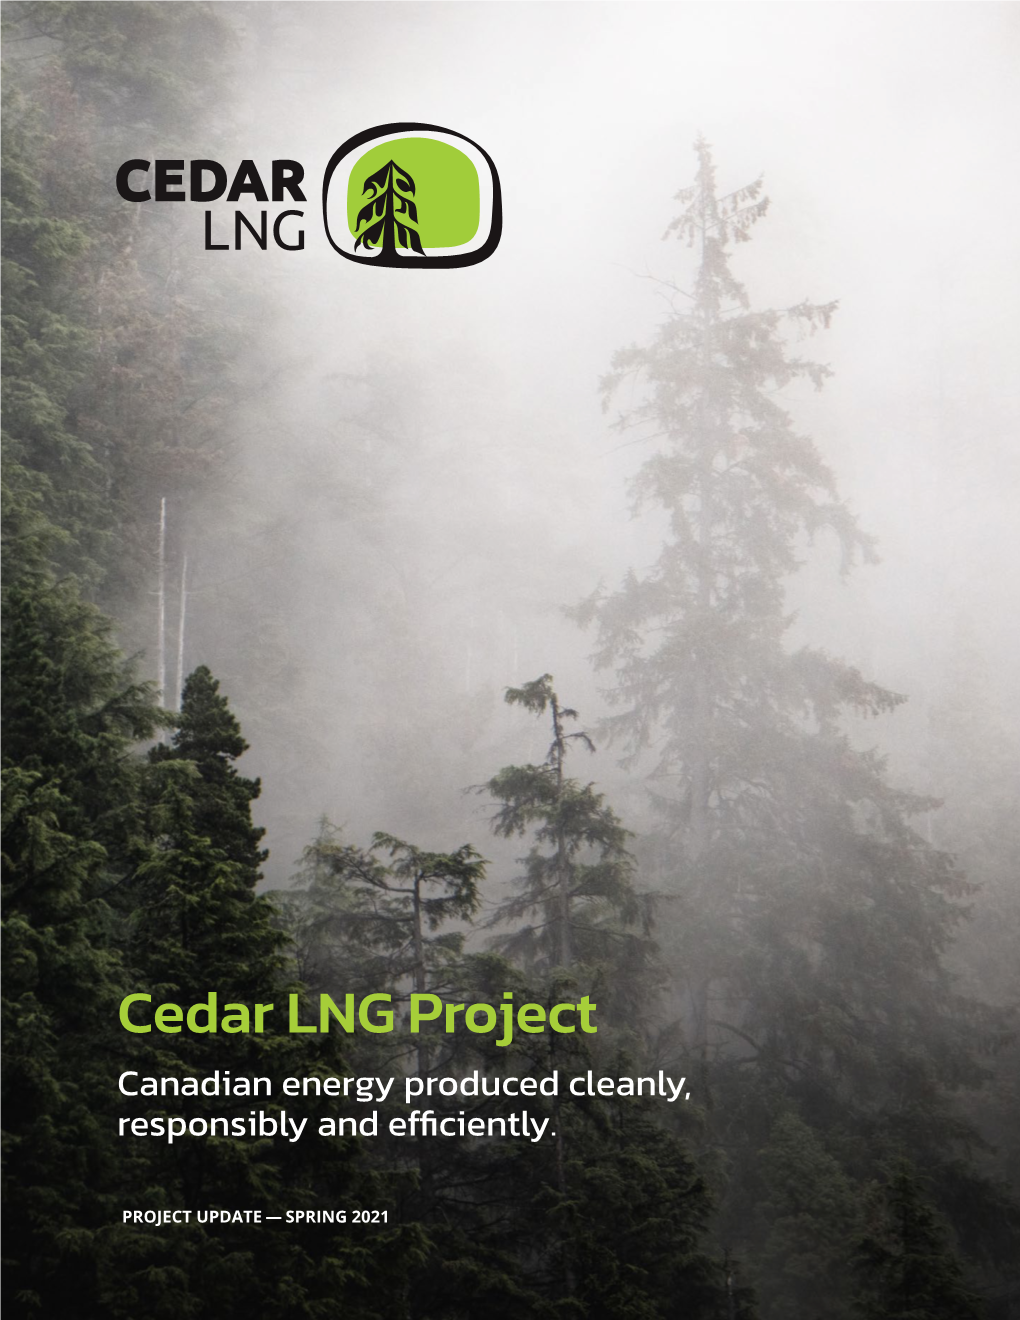 Cedar LNG Project Canadian Energy Produced Cleanly, Responsibly and Efficiently